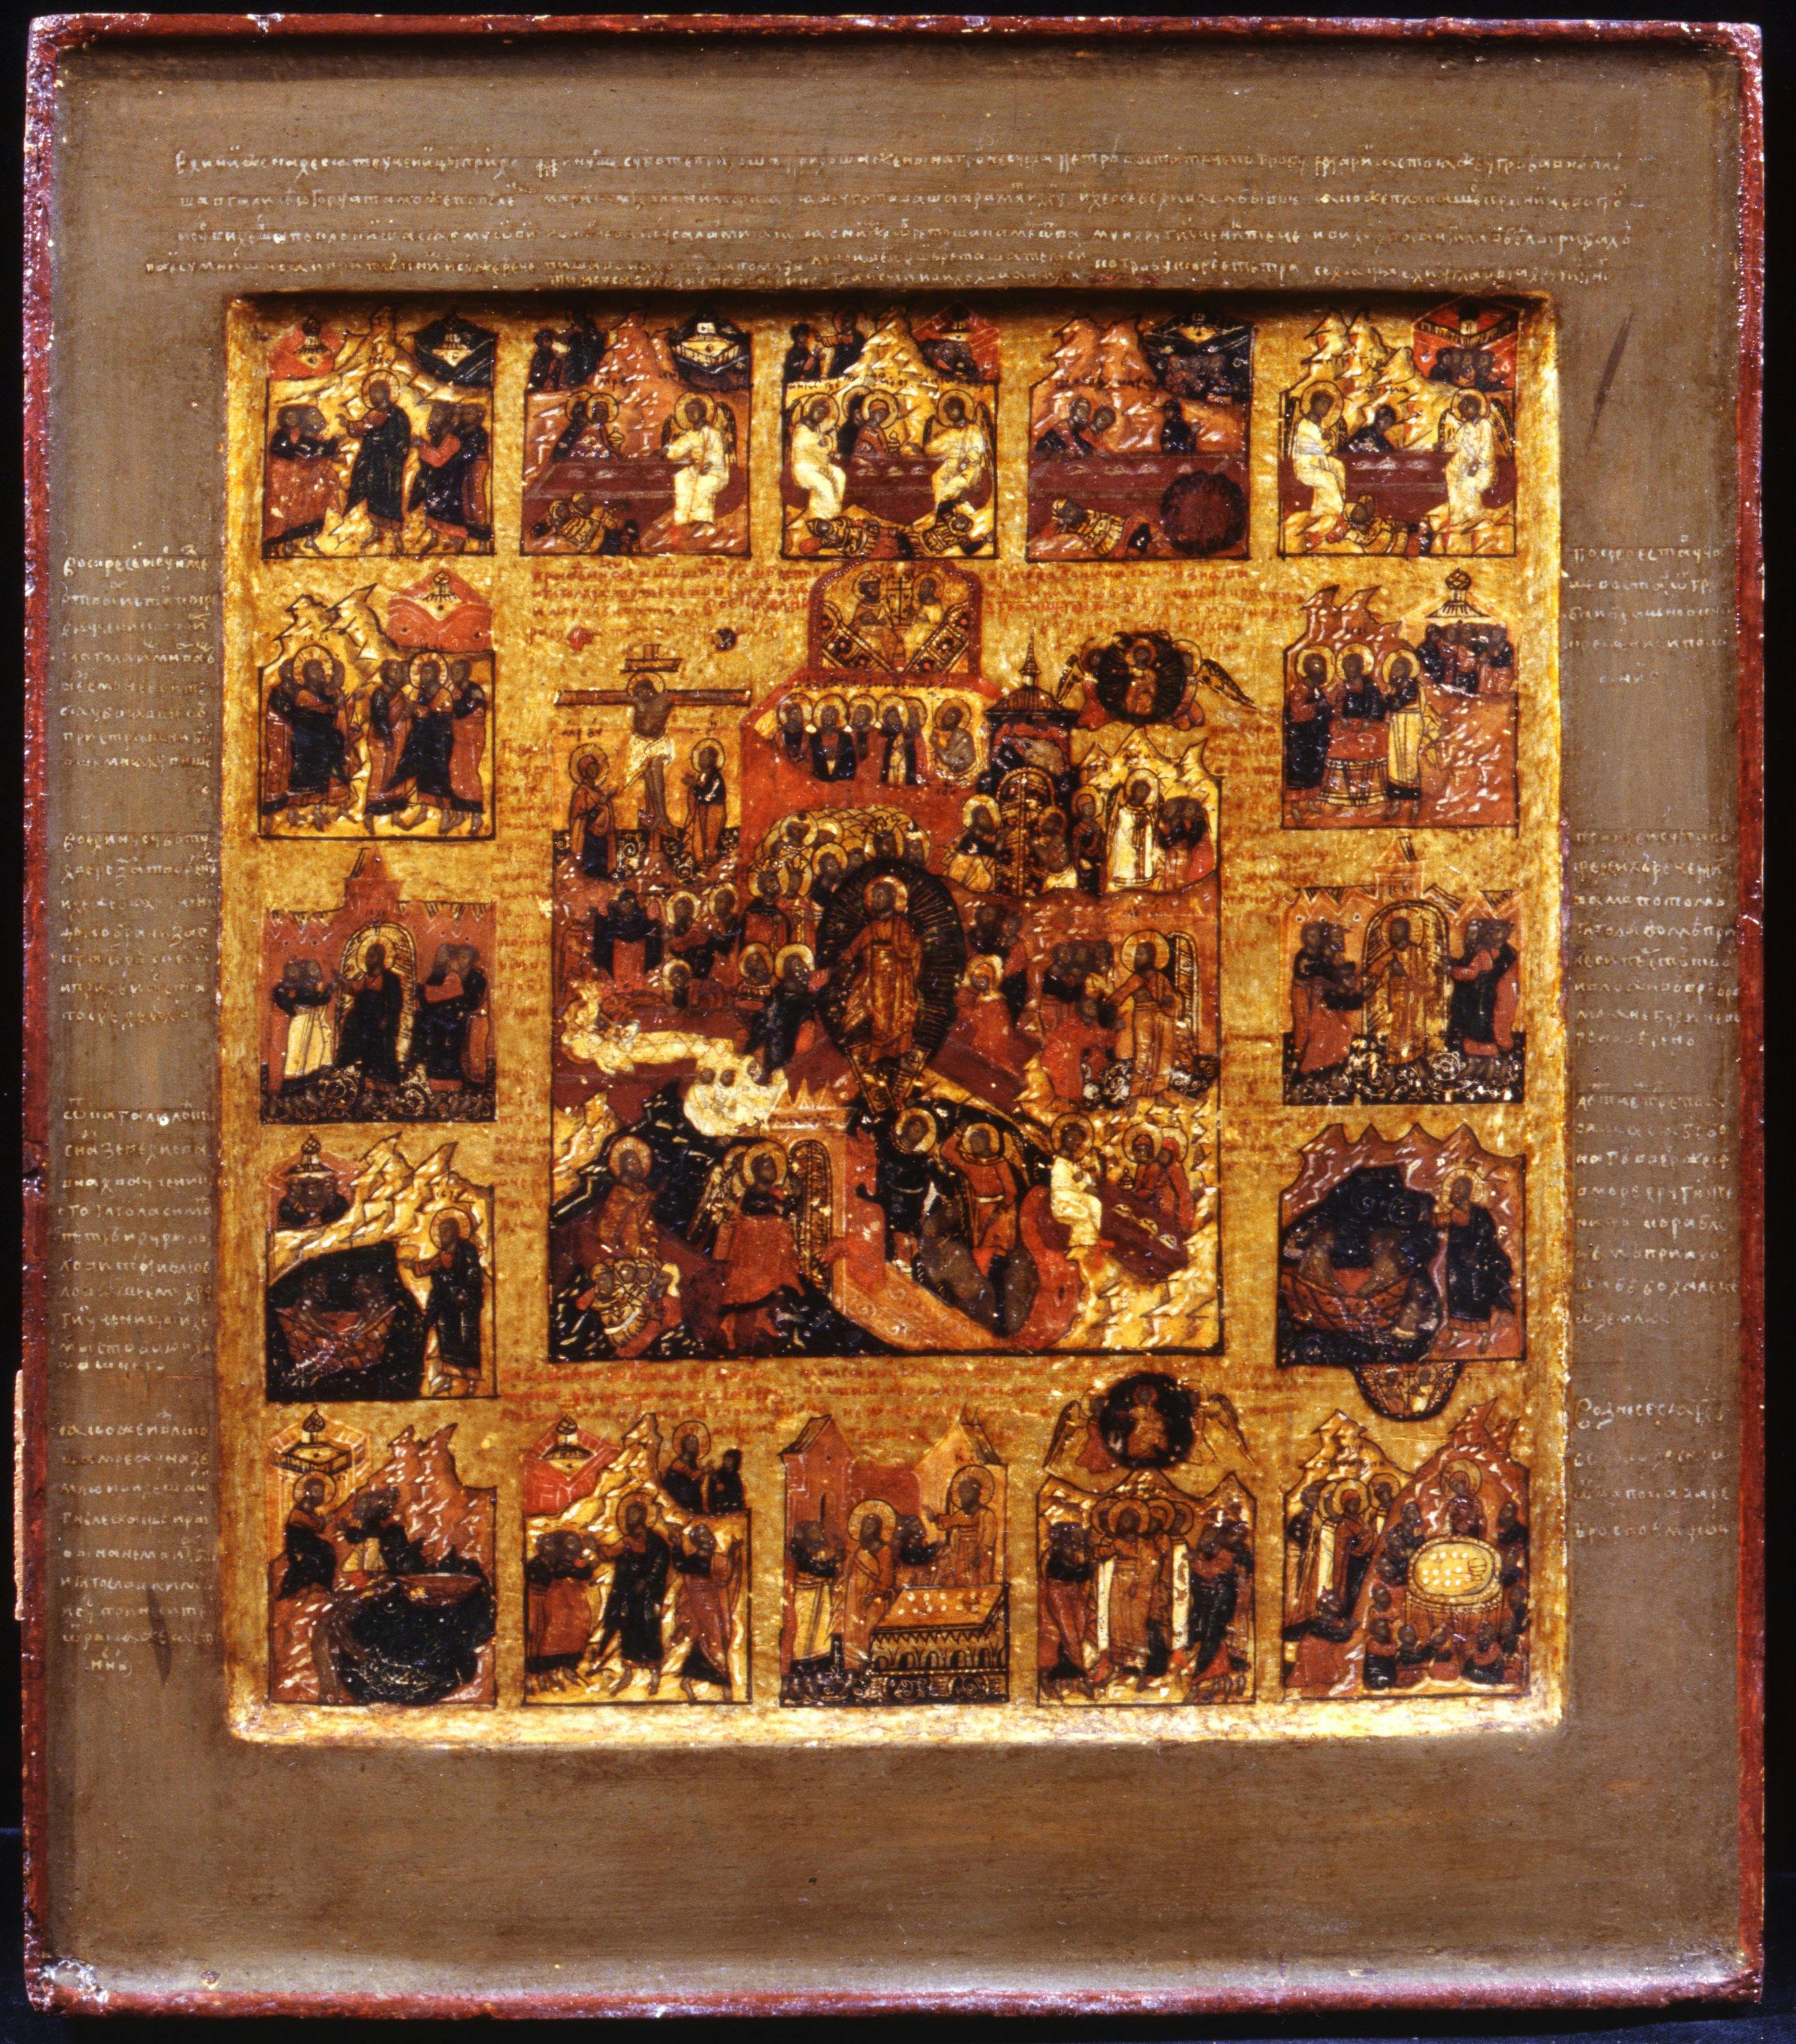 Resurrection of Christ and Descent into Hell, with sixteen scenes of Christ's post-mortem stories